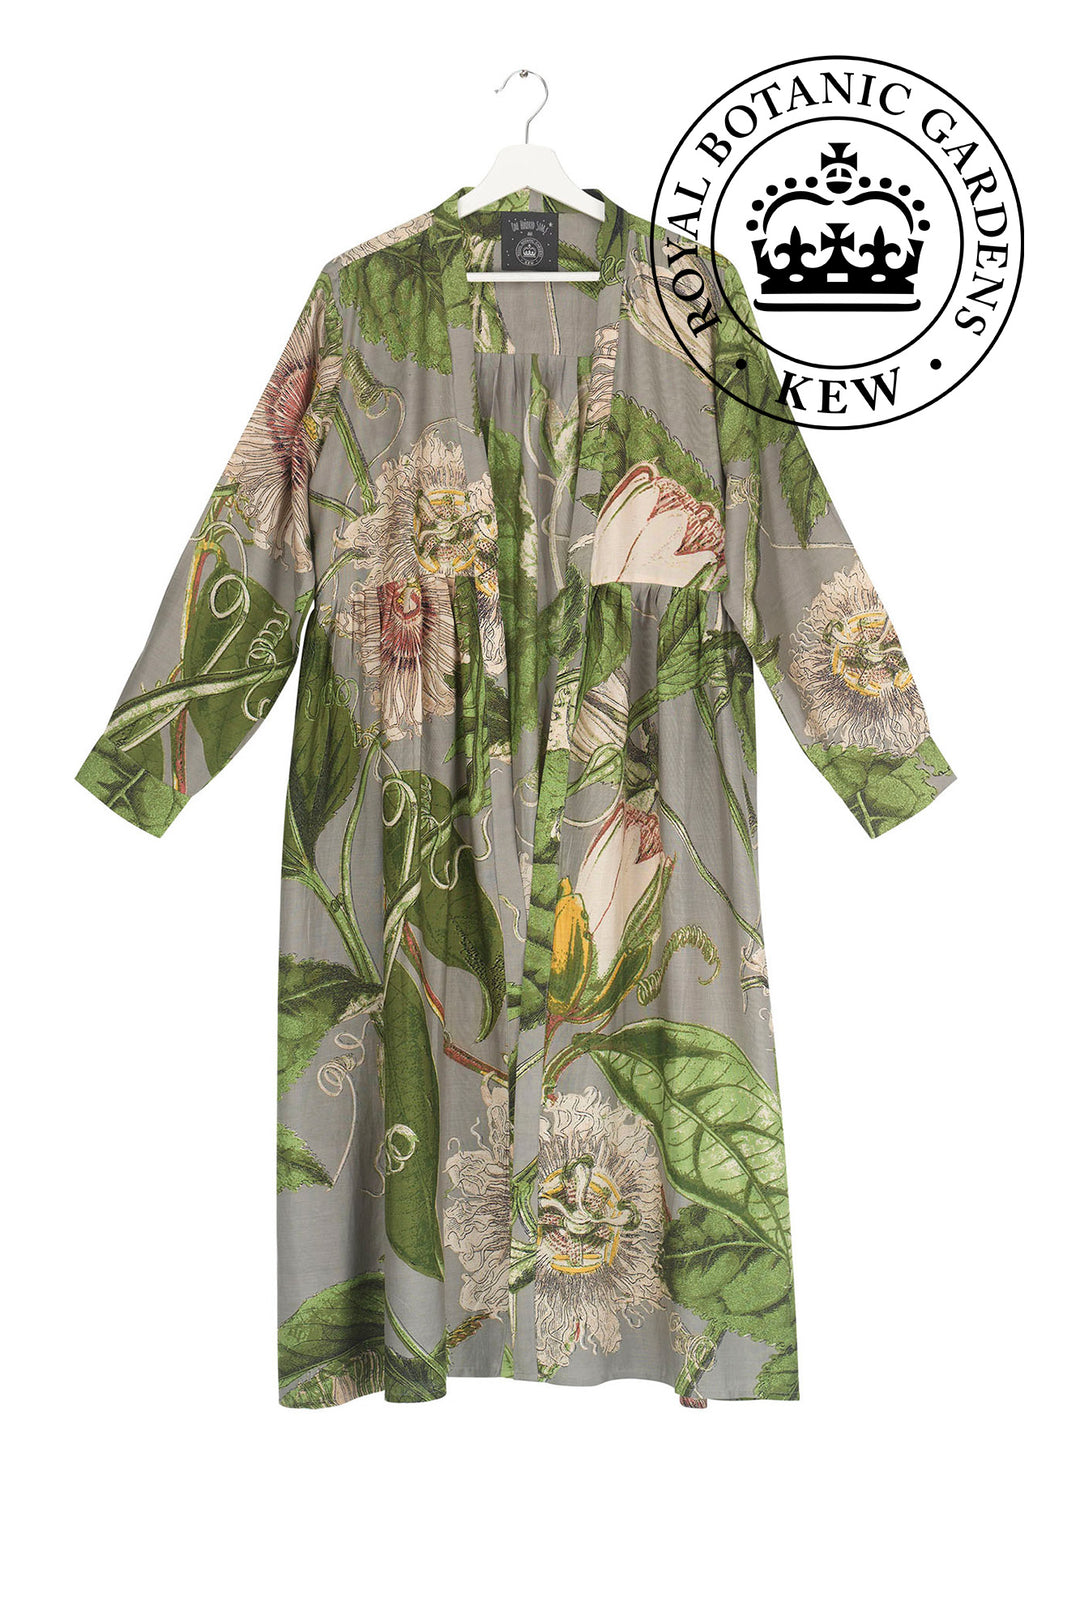 KEW Passion Flower Stone Duster Coat- This stunning shape is both stylish and versatile, whether you choose to wear our duster coat as a luxurious house coat, as part of a chic ensemble during the day or over a little black dress during the evening.